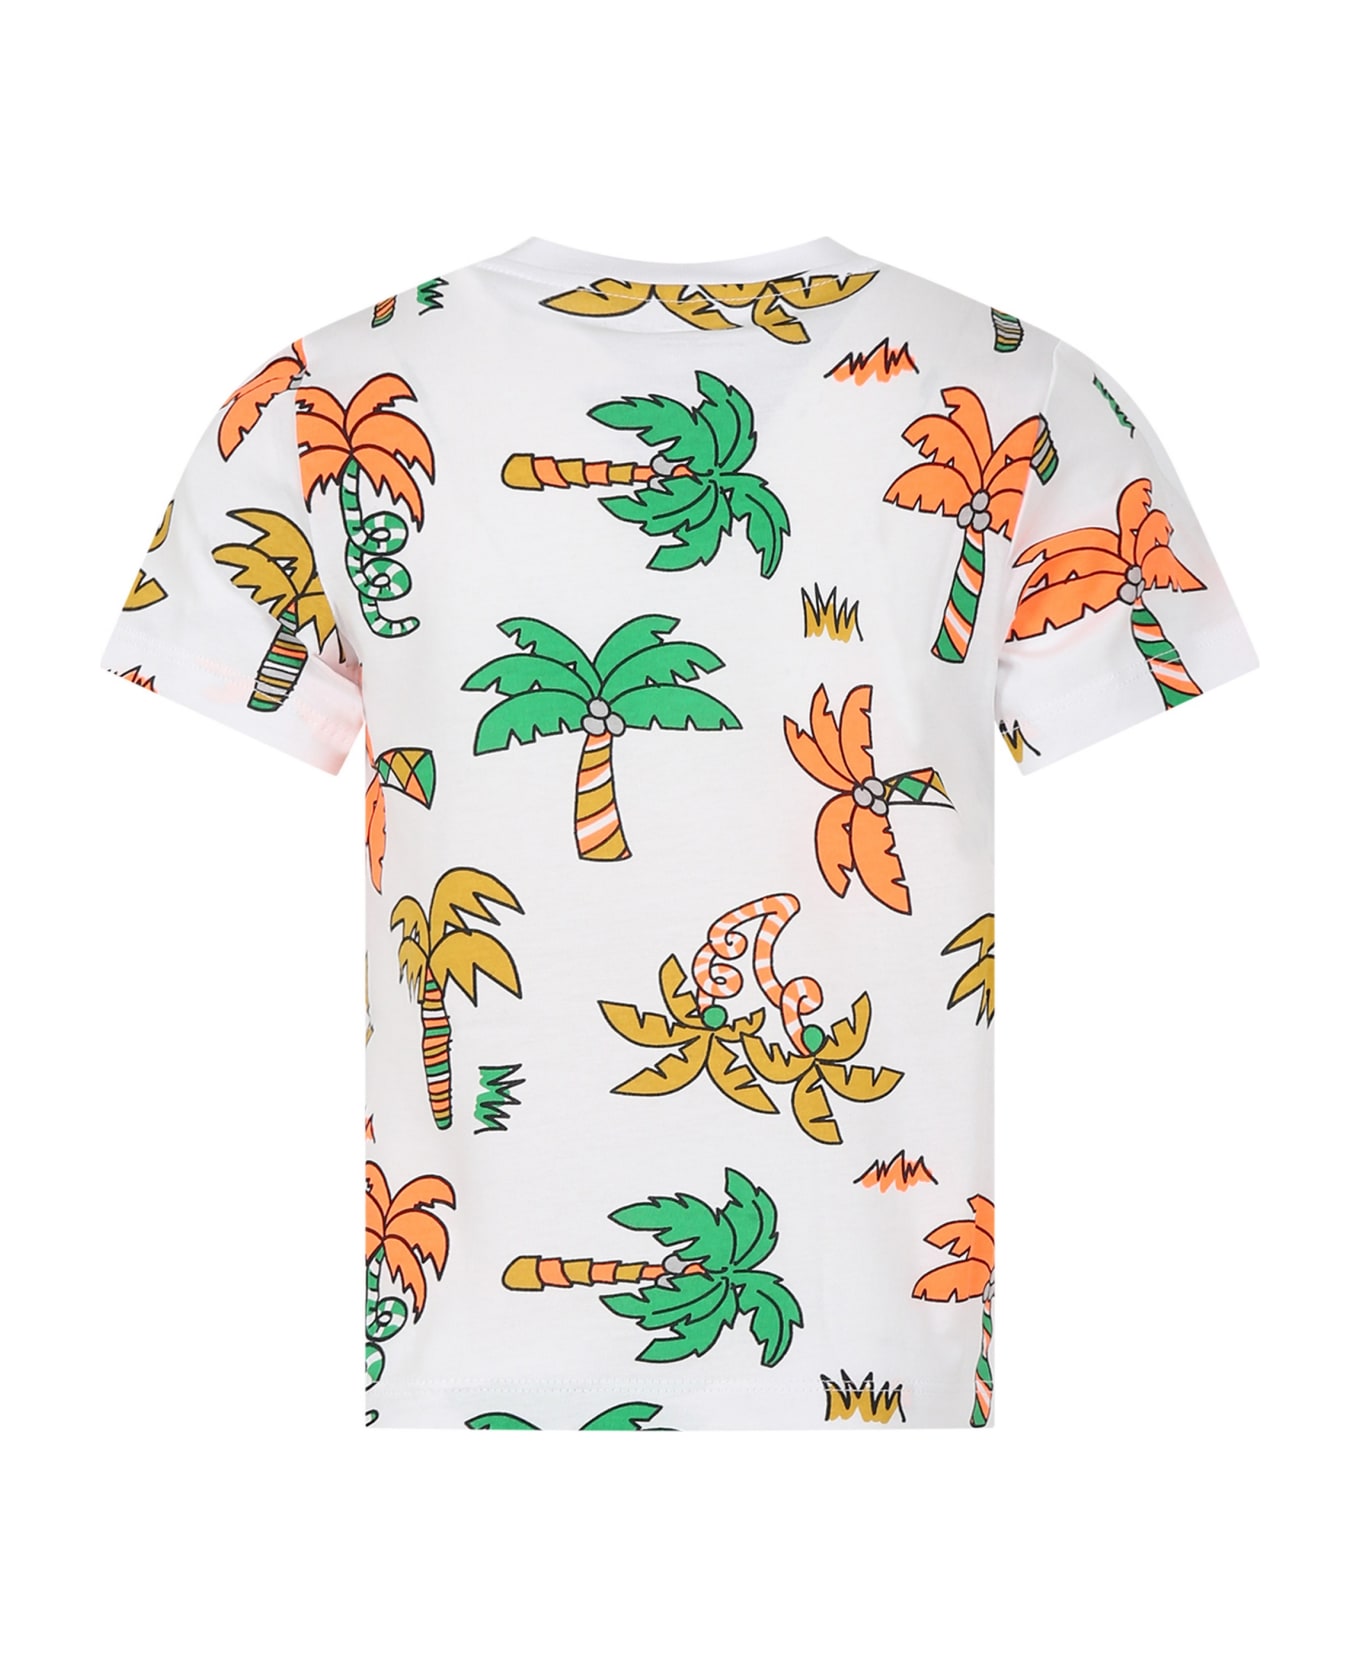 Stella McCartney Kids White T-shirt For Boy With Palm Trees - White